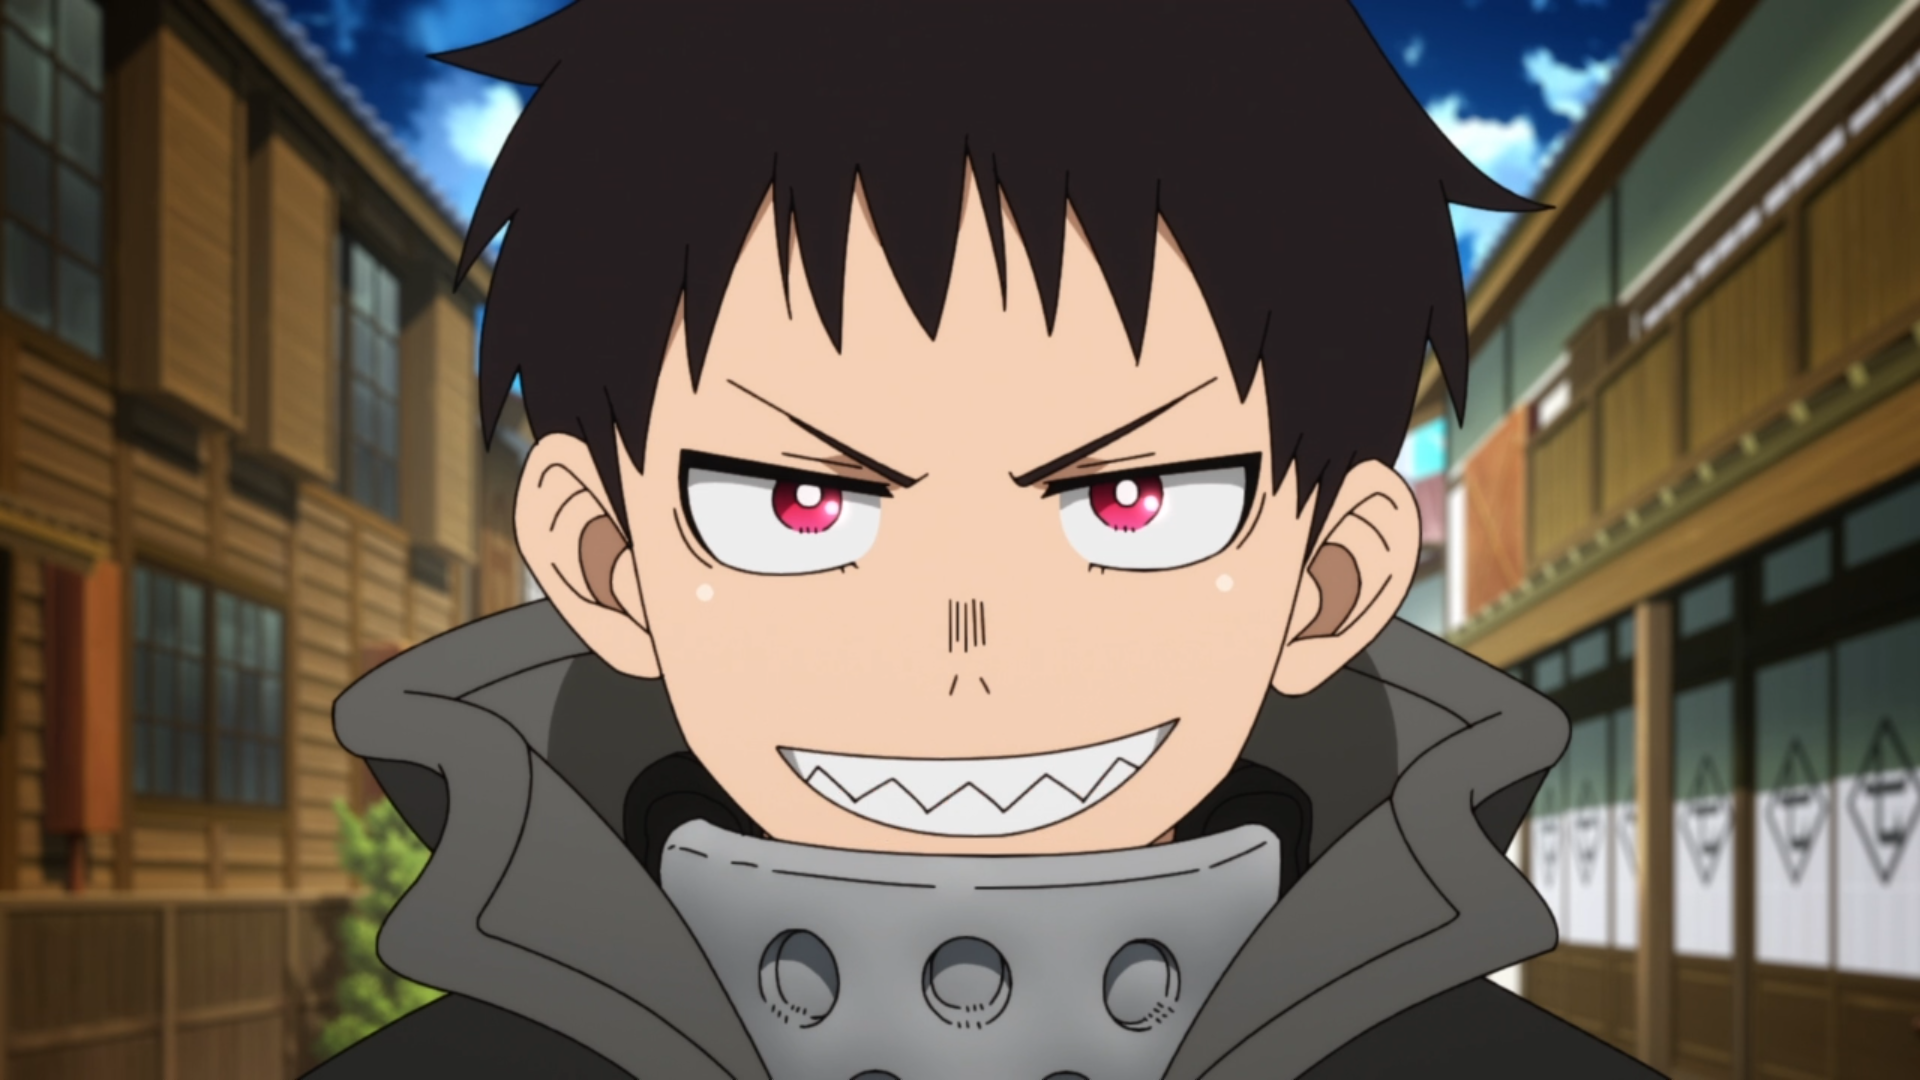 Fire Force Reveals Connection to Creator's Other Work Soul Eater